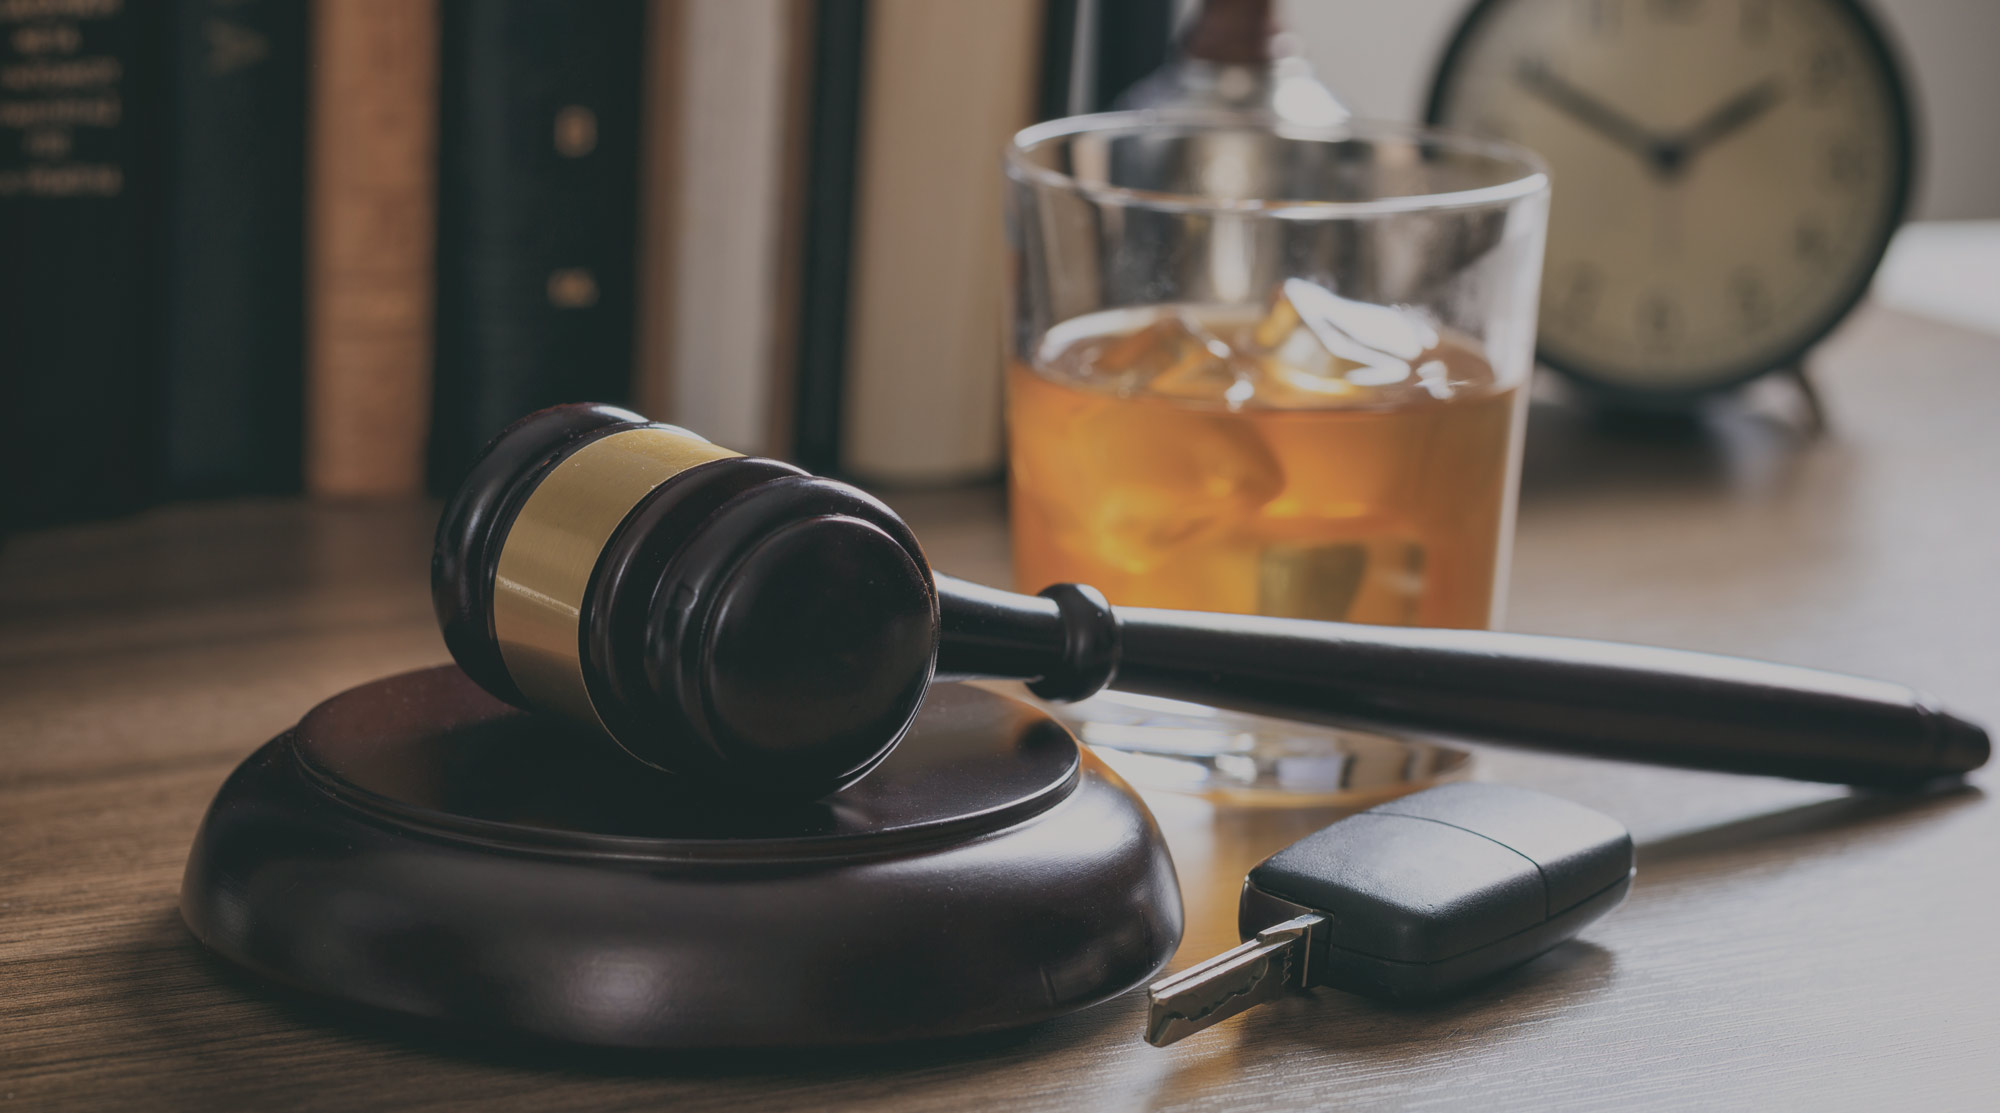 What to do if you get pulled over for DUI in California